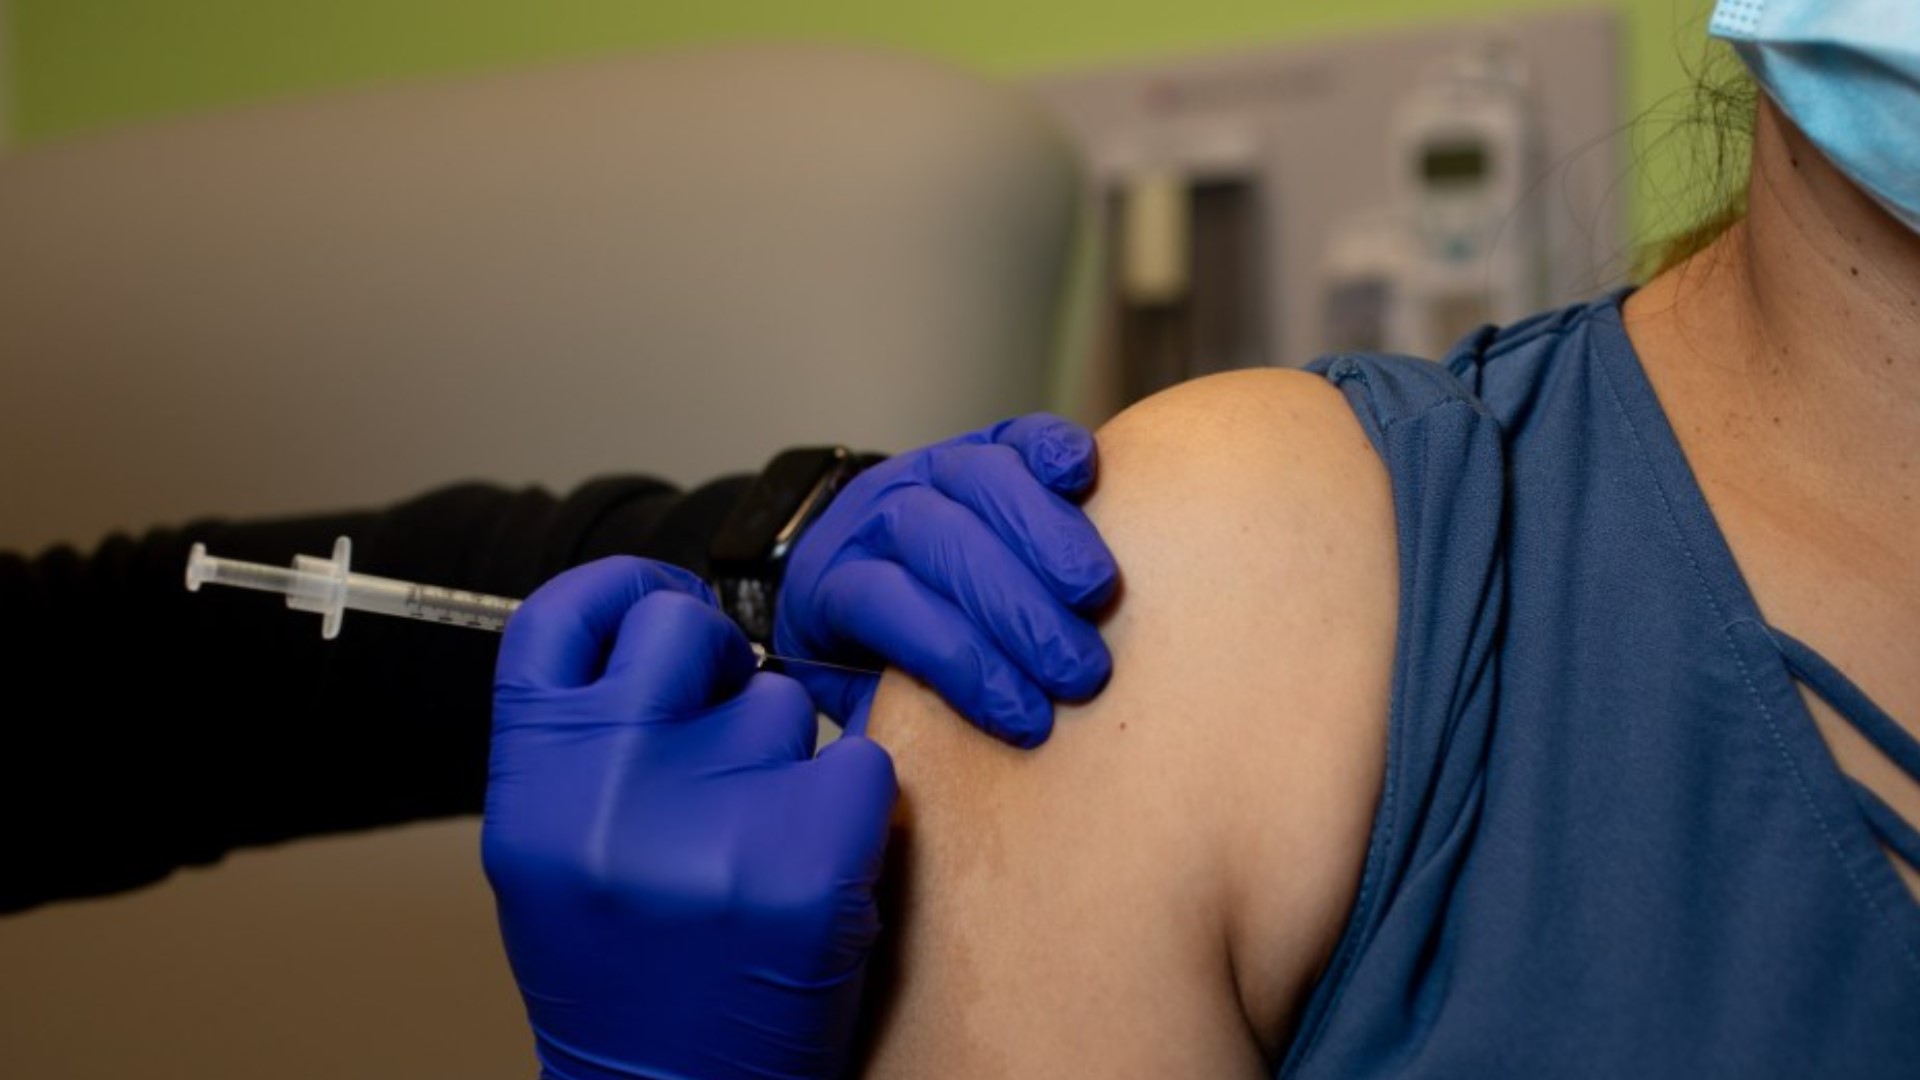 Two weekend vaccine events offer alternate model to reach communities of color